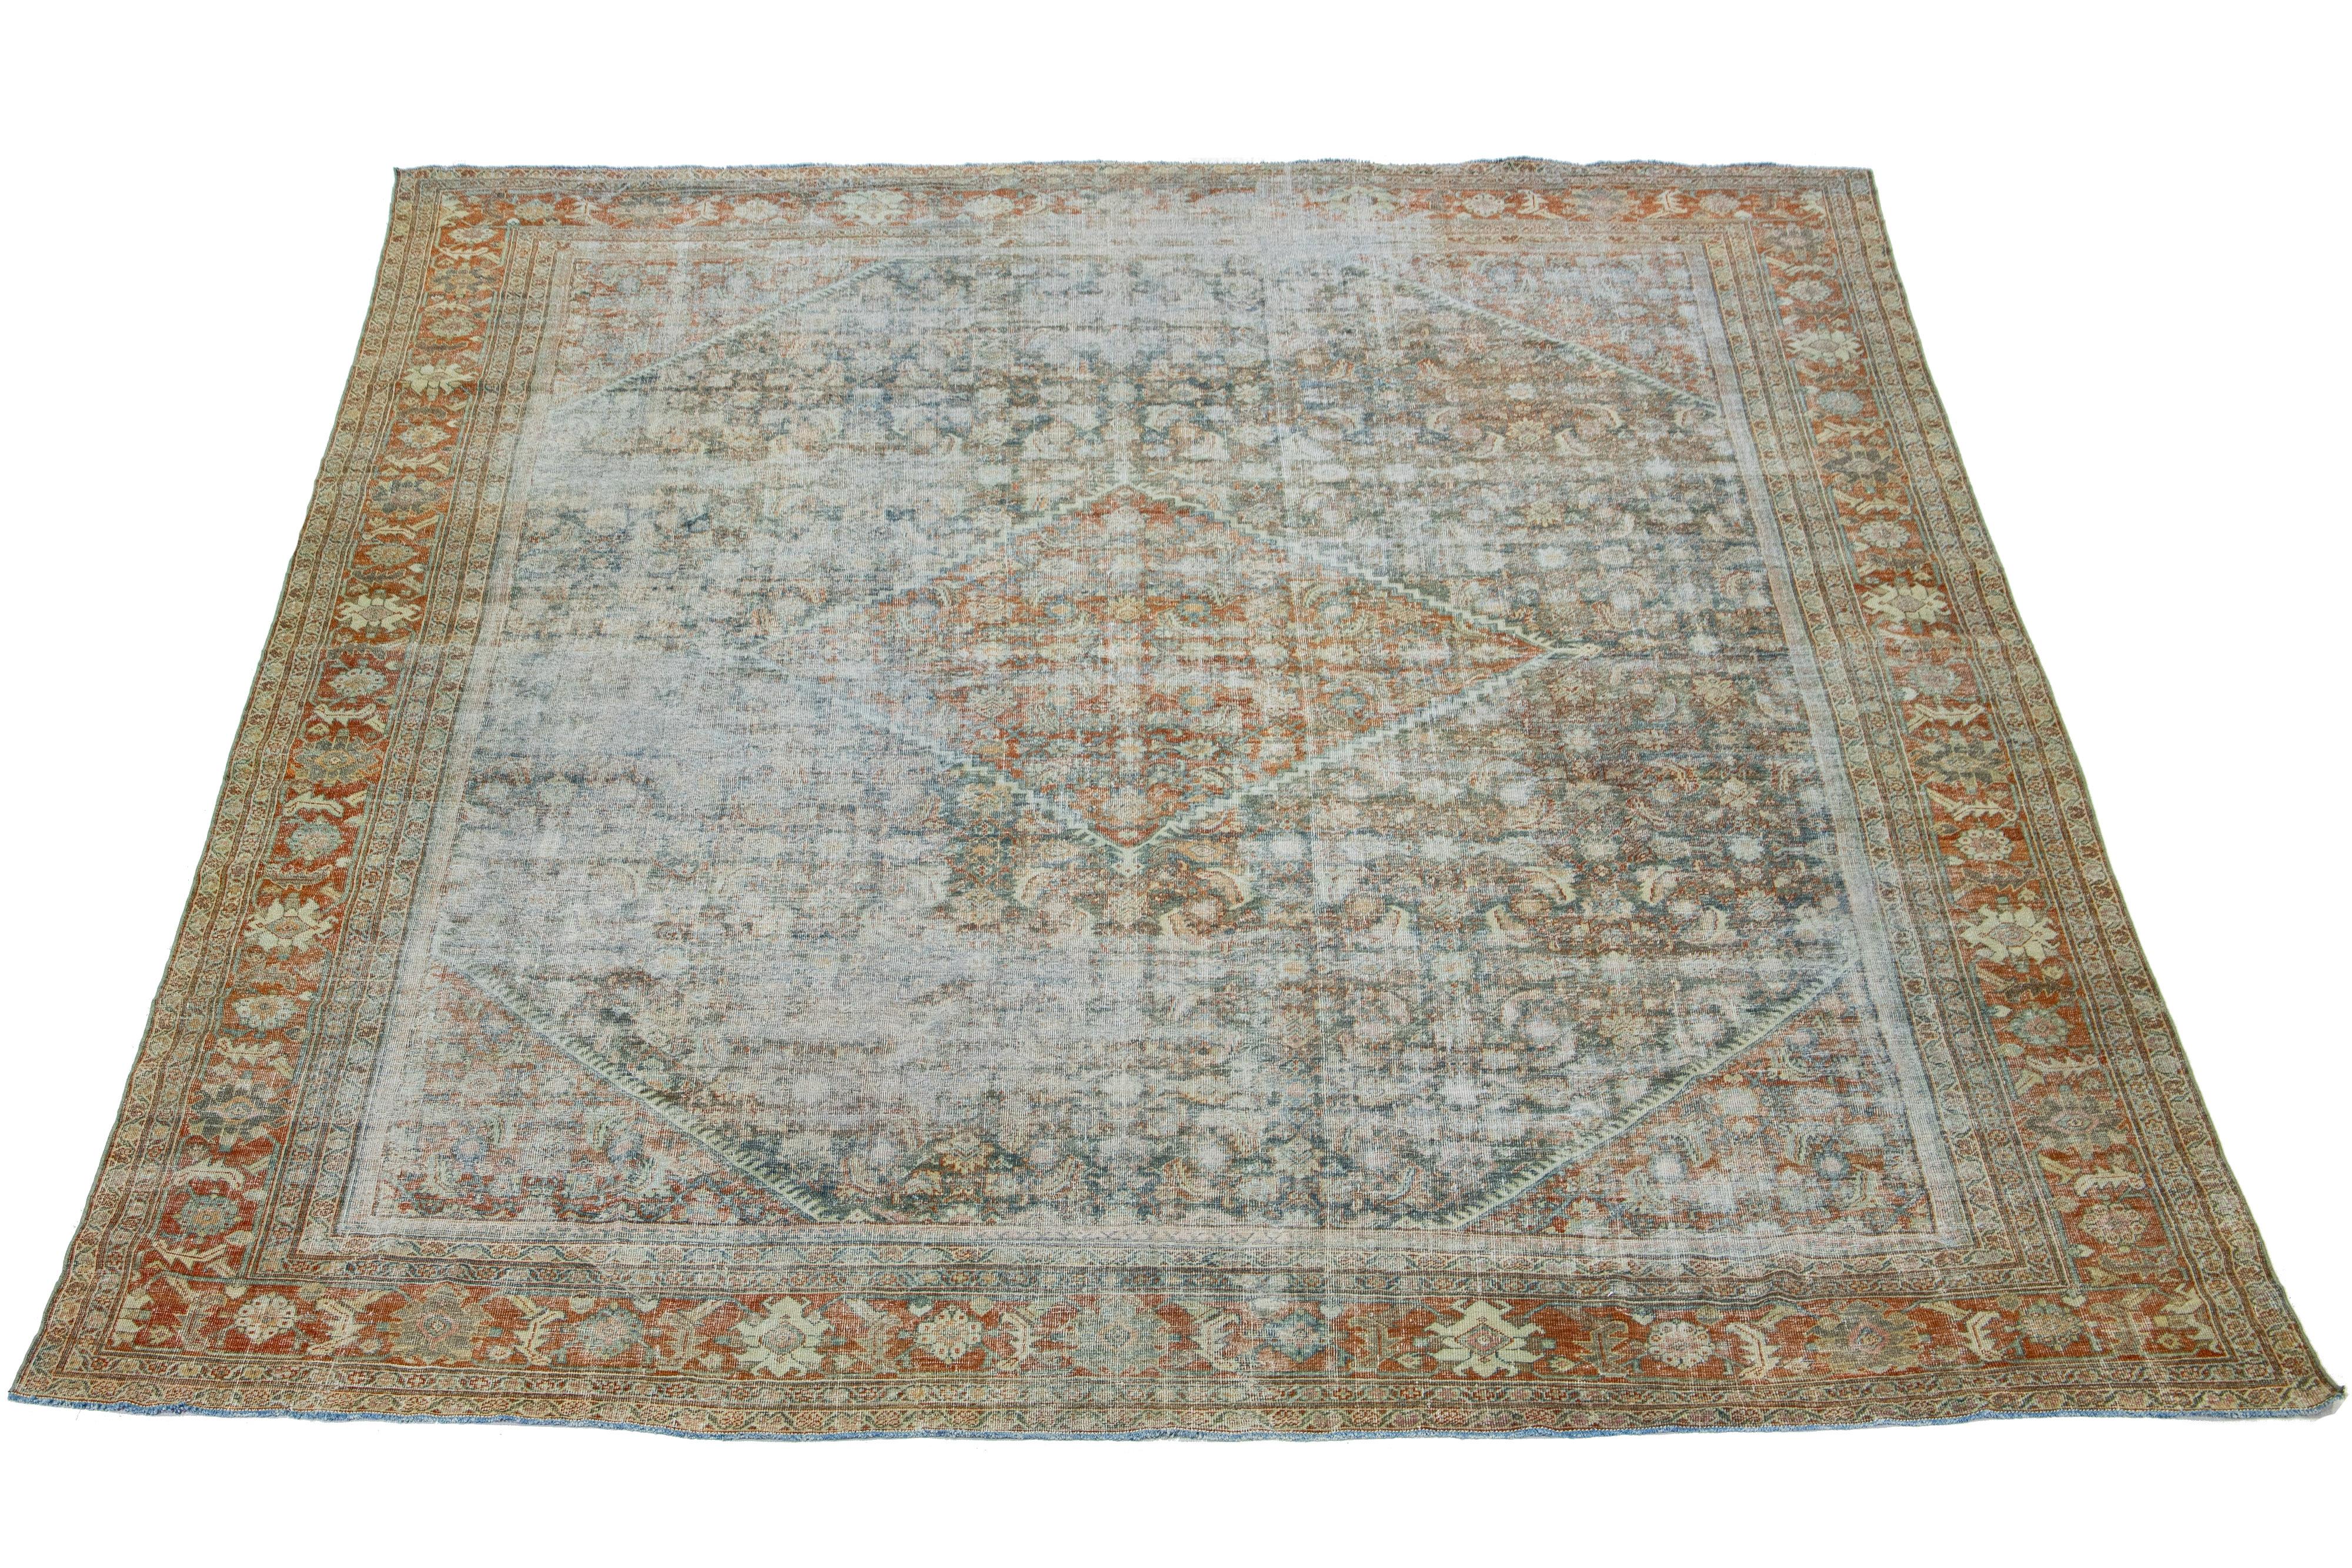 Beautiful Antique Mahal hand-knotted wool rug with a rust color field. This Persian rug has classic blue, gray, beige, and brown hues throughout the floral motif.

This rug measures 12'3